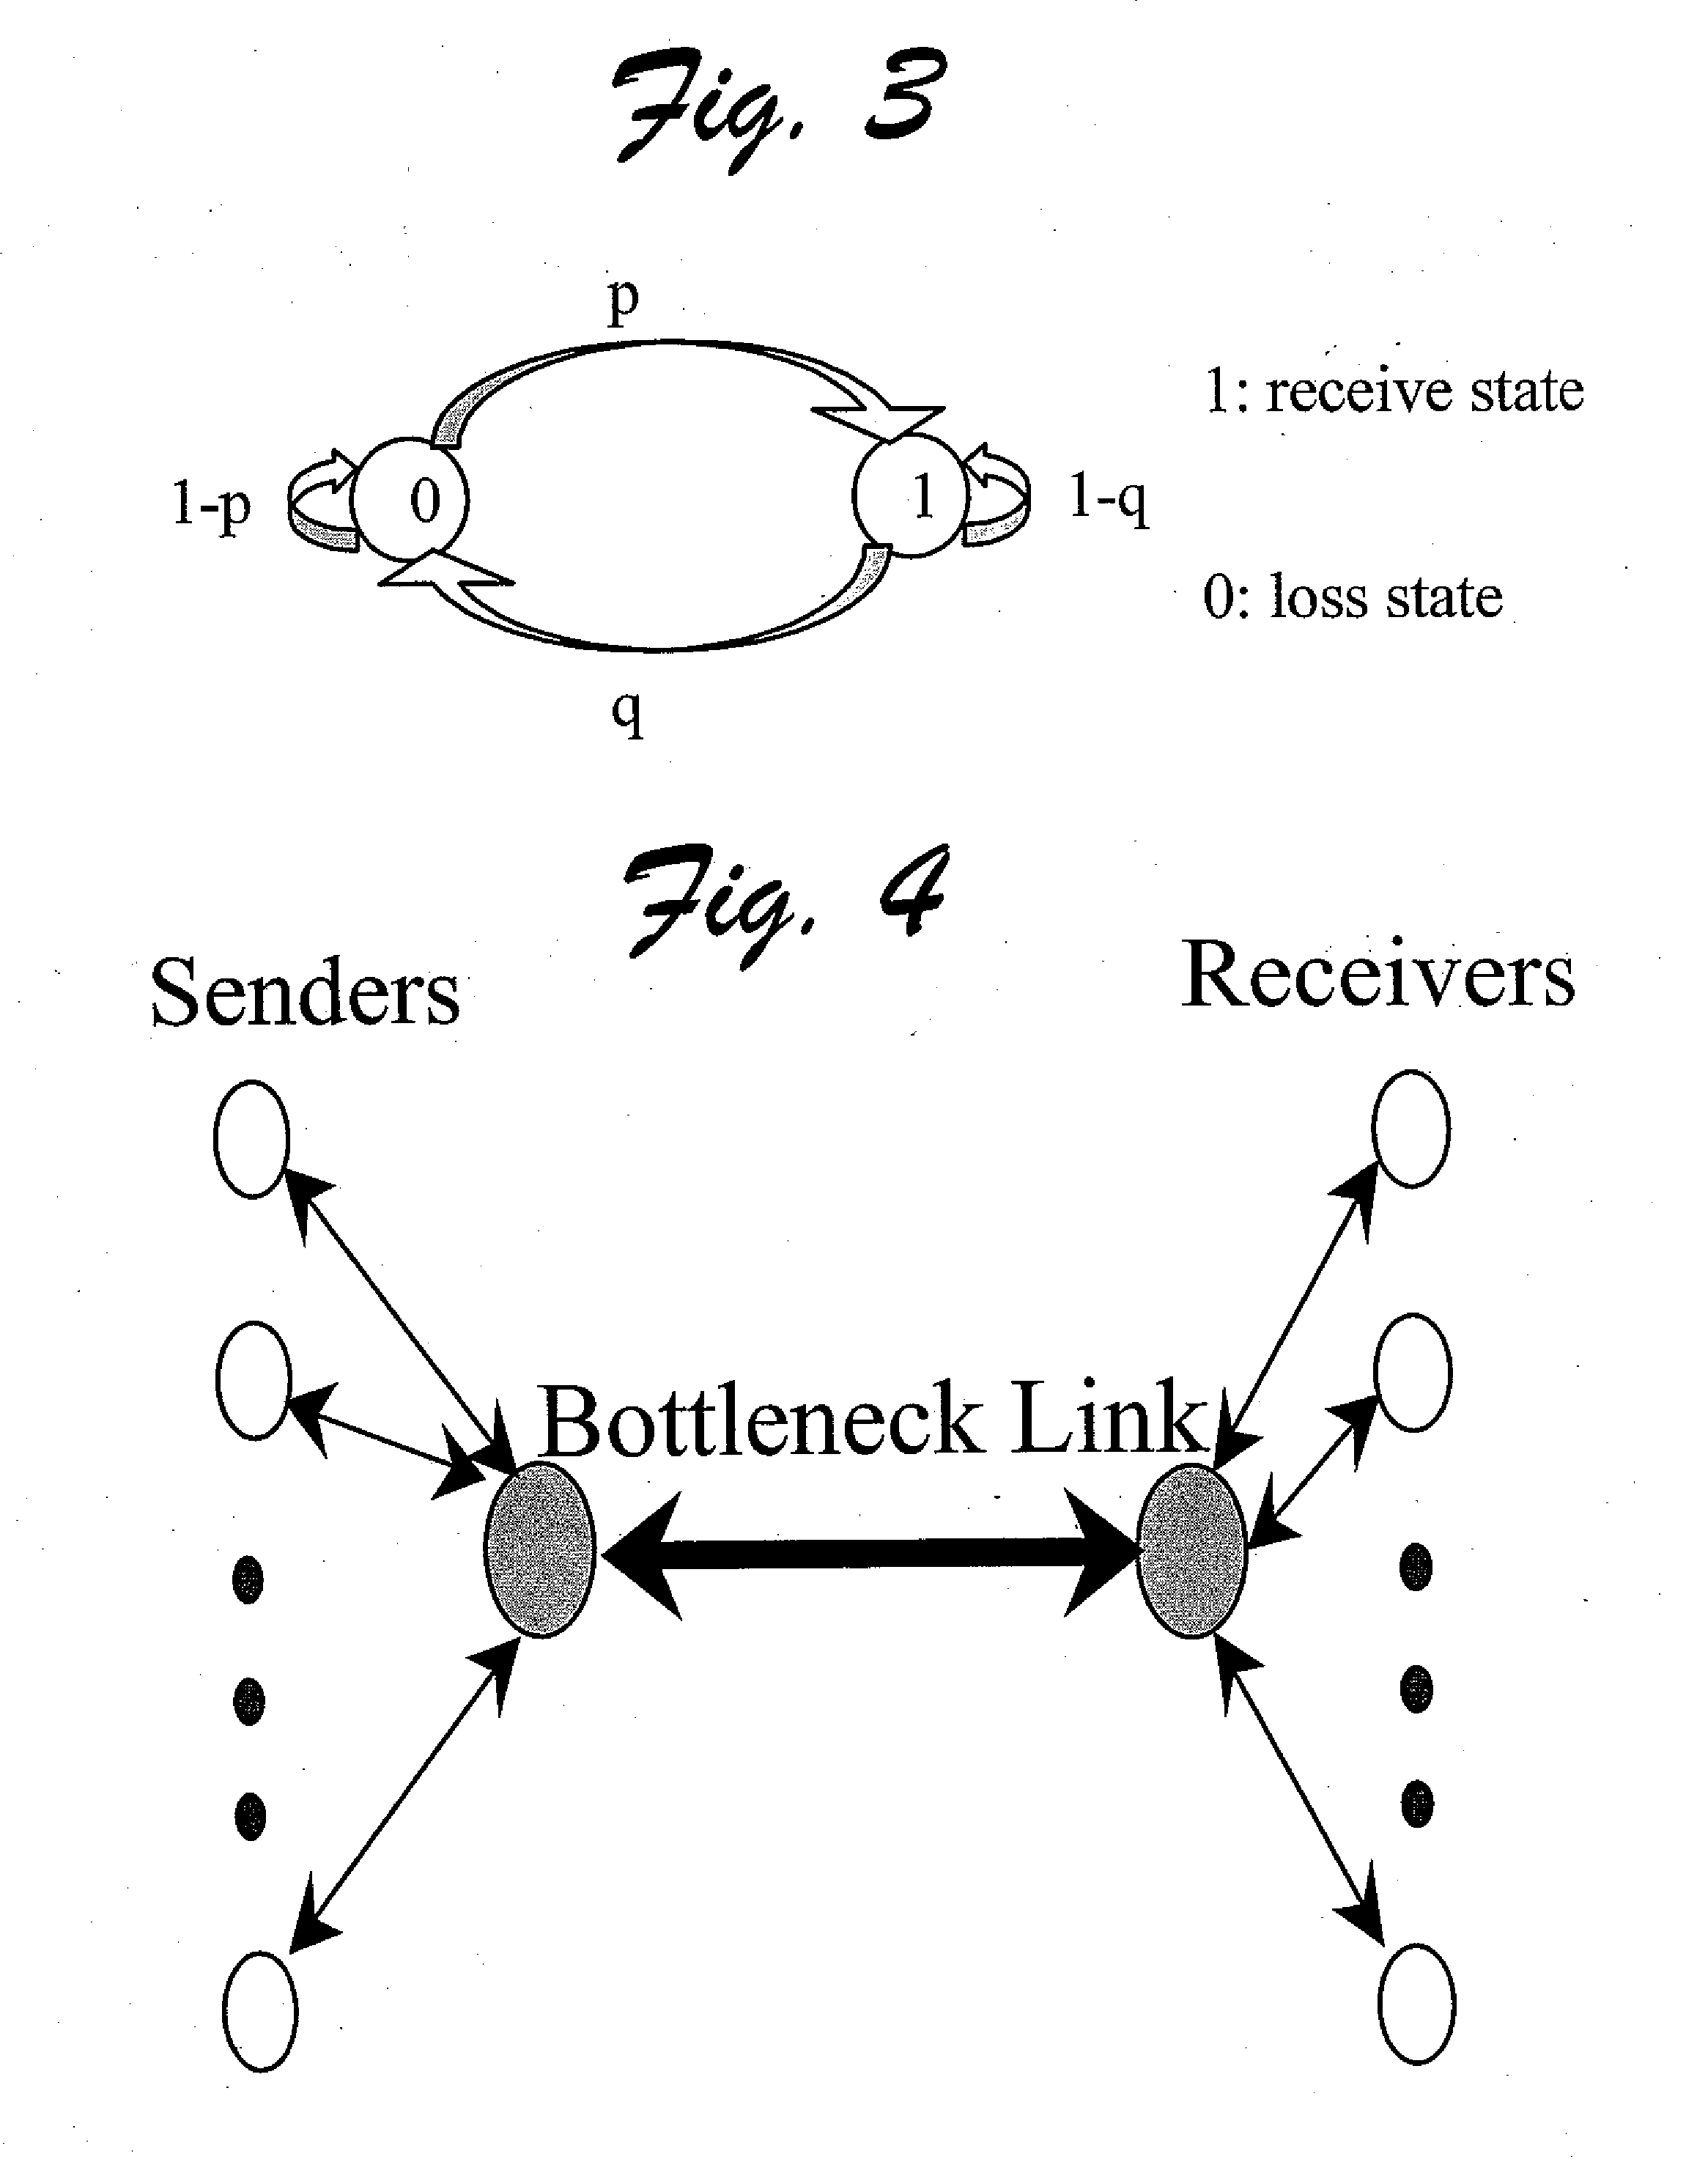 Resource Allocation in Multi-Stream IP Network for Optimized Quality of Service